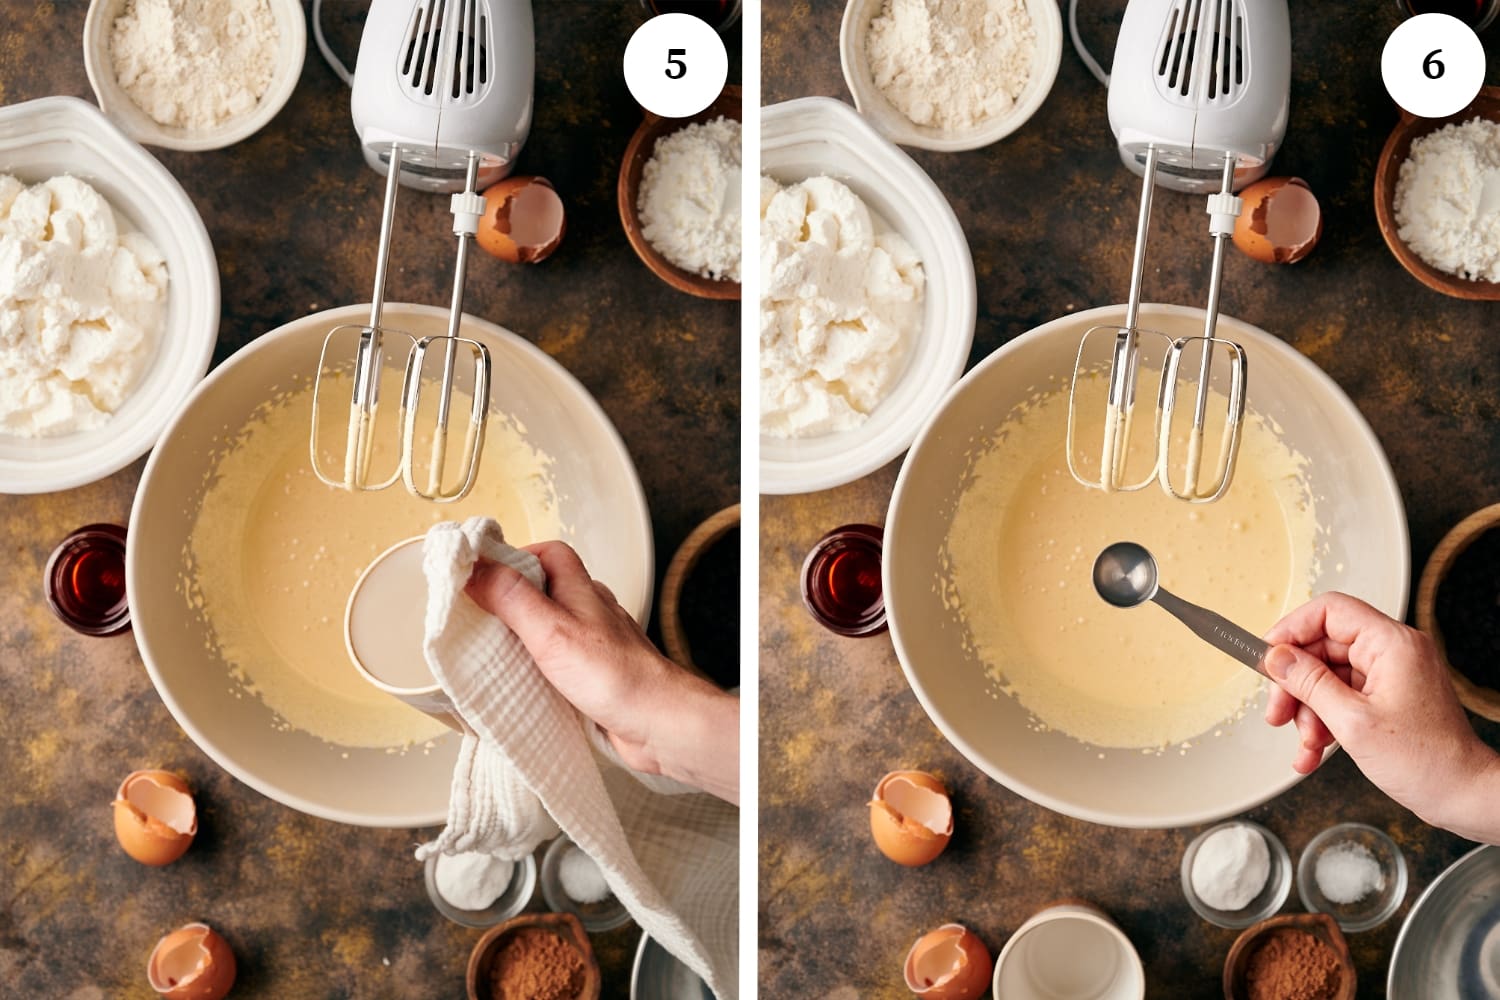 zuccotto procedure: a white bowl with batter a hand holding a mug of hot water and an electric hand mixer. second photo is same but holding a tablespoon